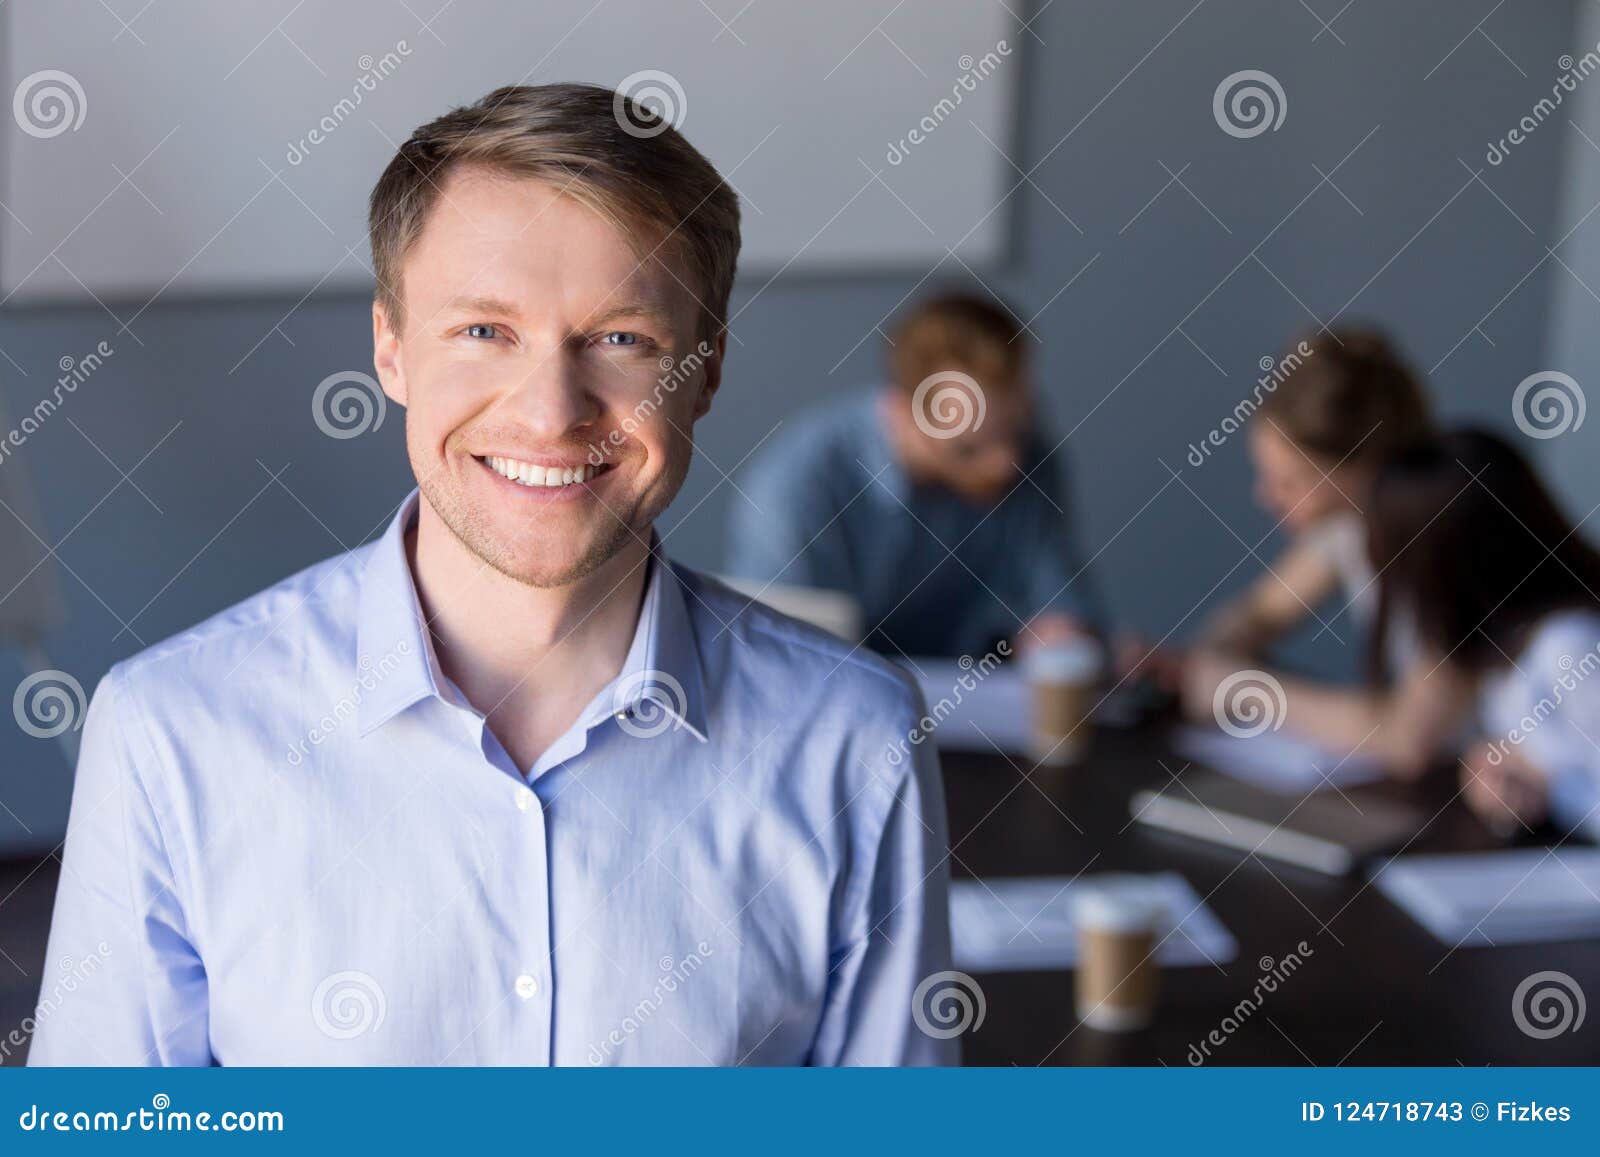 Portrait of Smiling Male Employee Posing during Briefing Stock Image ...